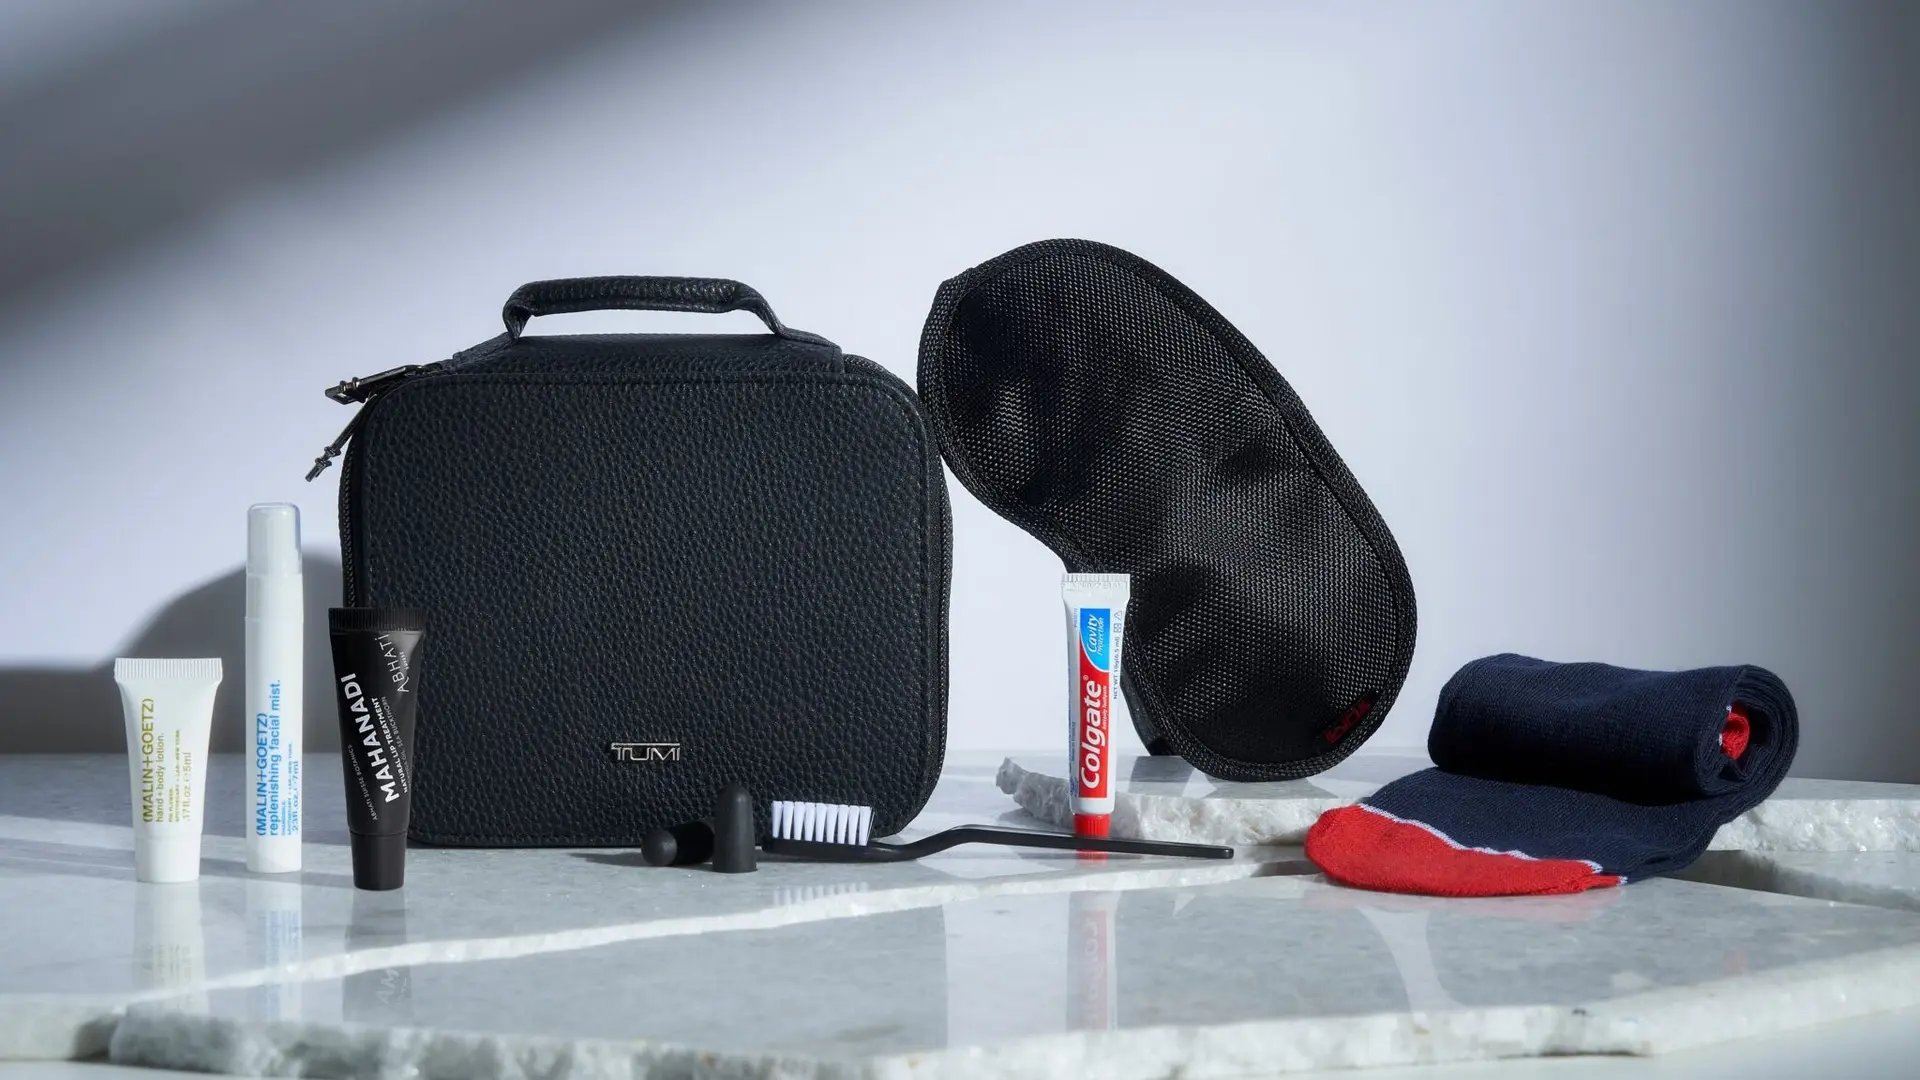 Airlines News - Air India partners with TUMI for new amenity kits